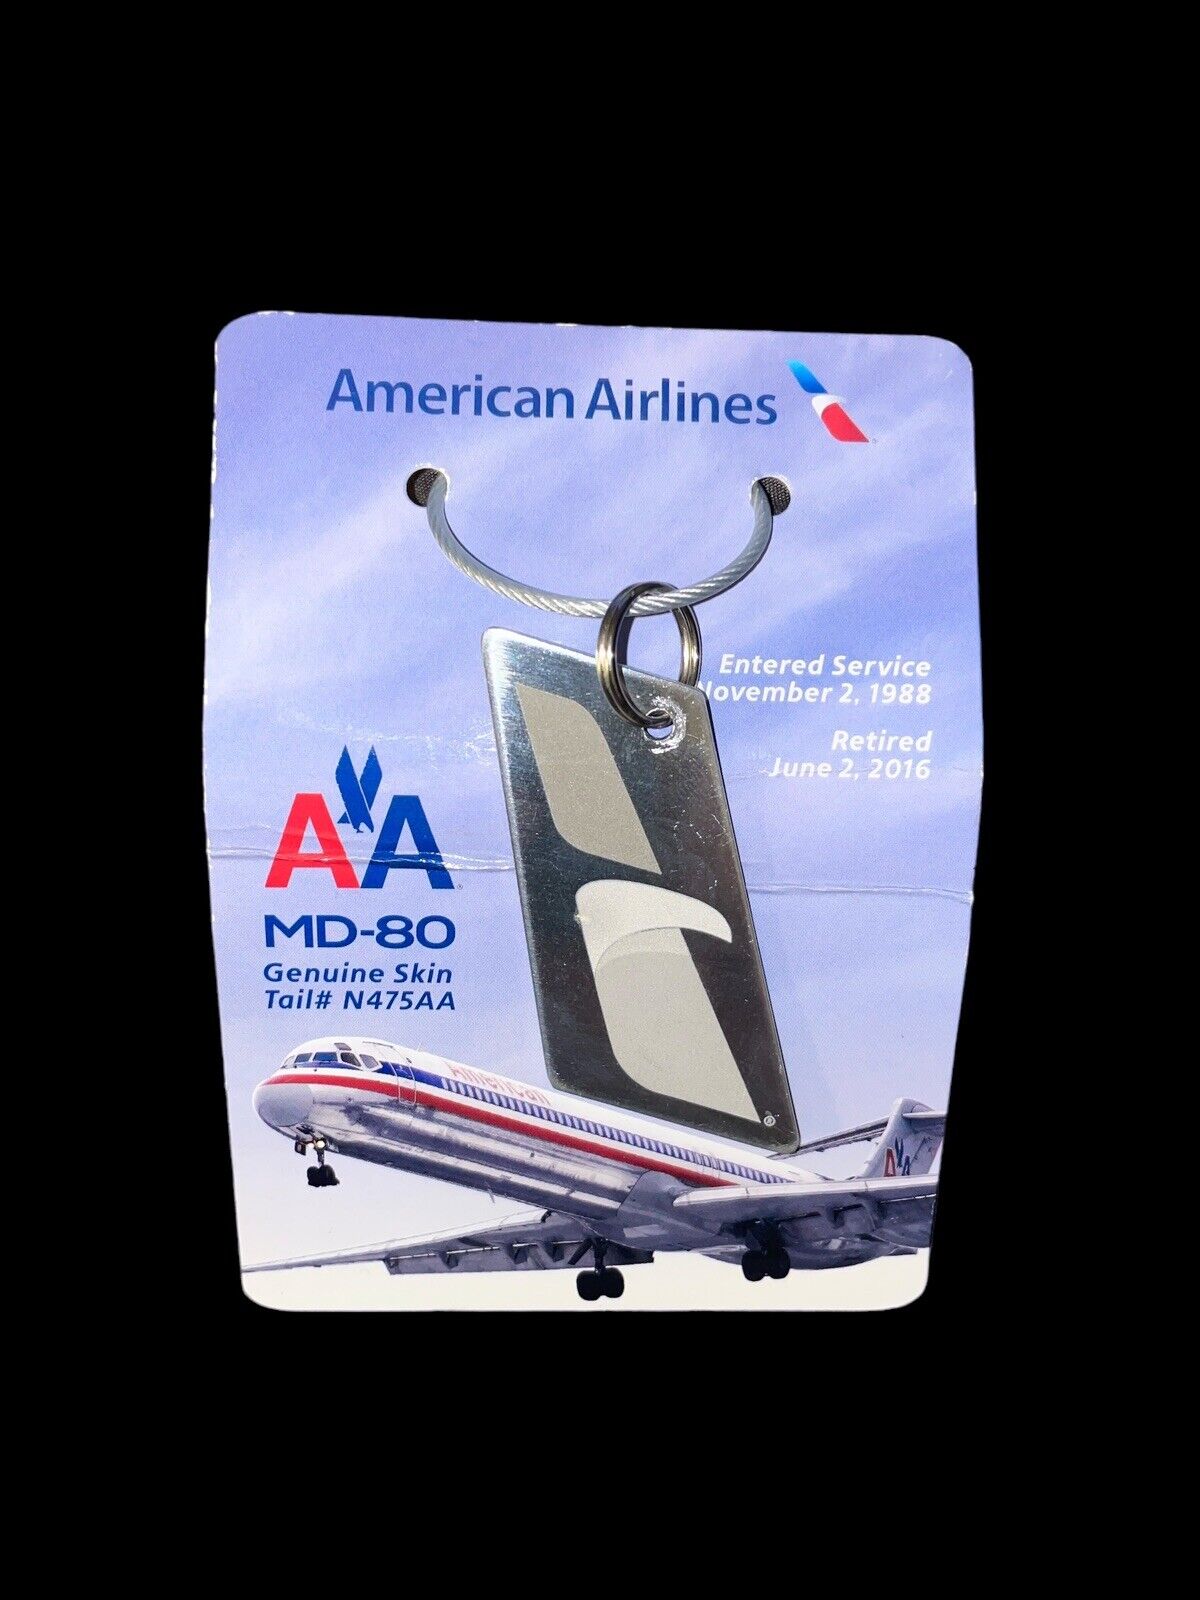 Plane Tags American Airlines MD-80 Tail Skin #N475AA 1988-2016